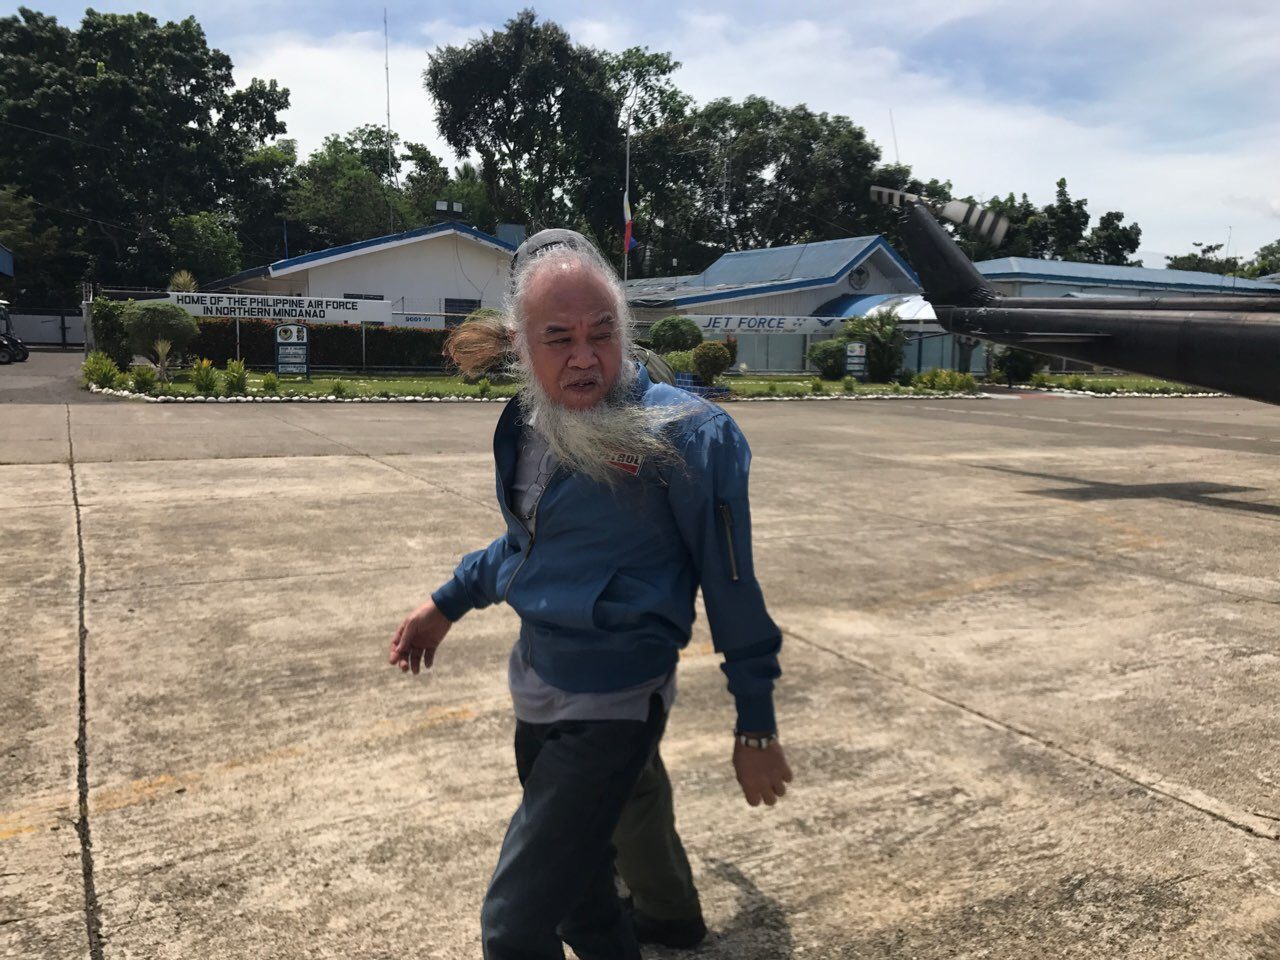 Marawi priest Chito Soganub rescued from Maute